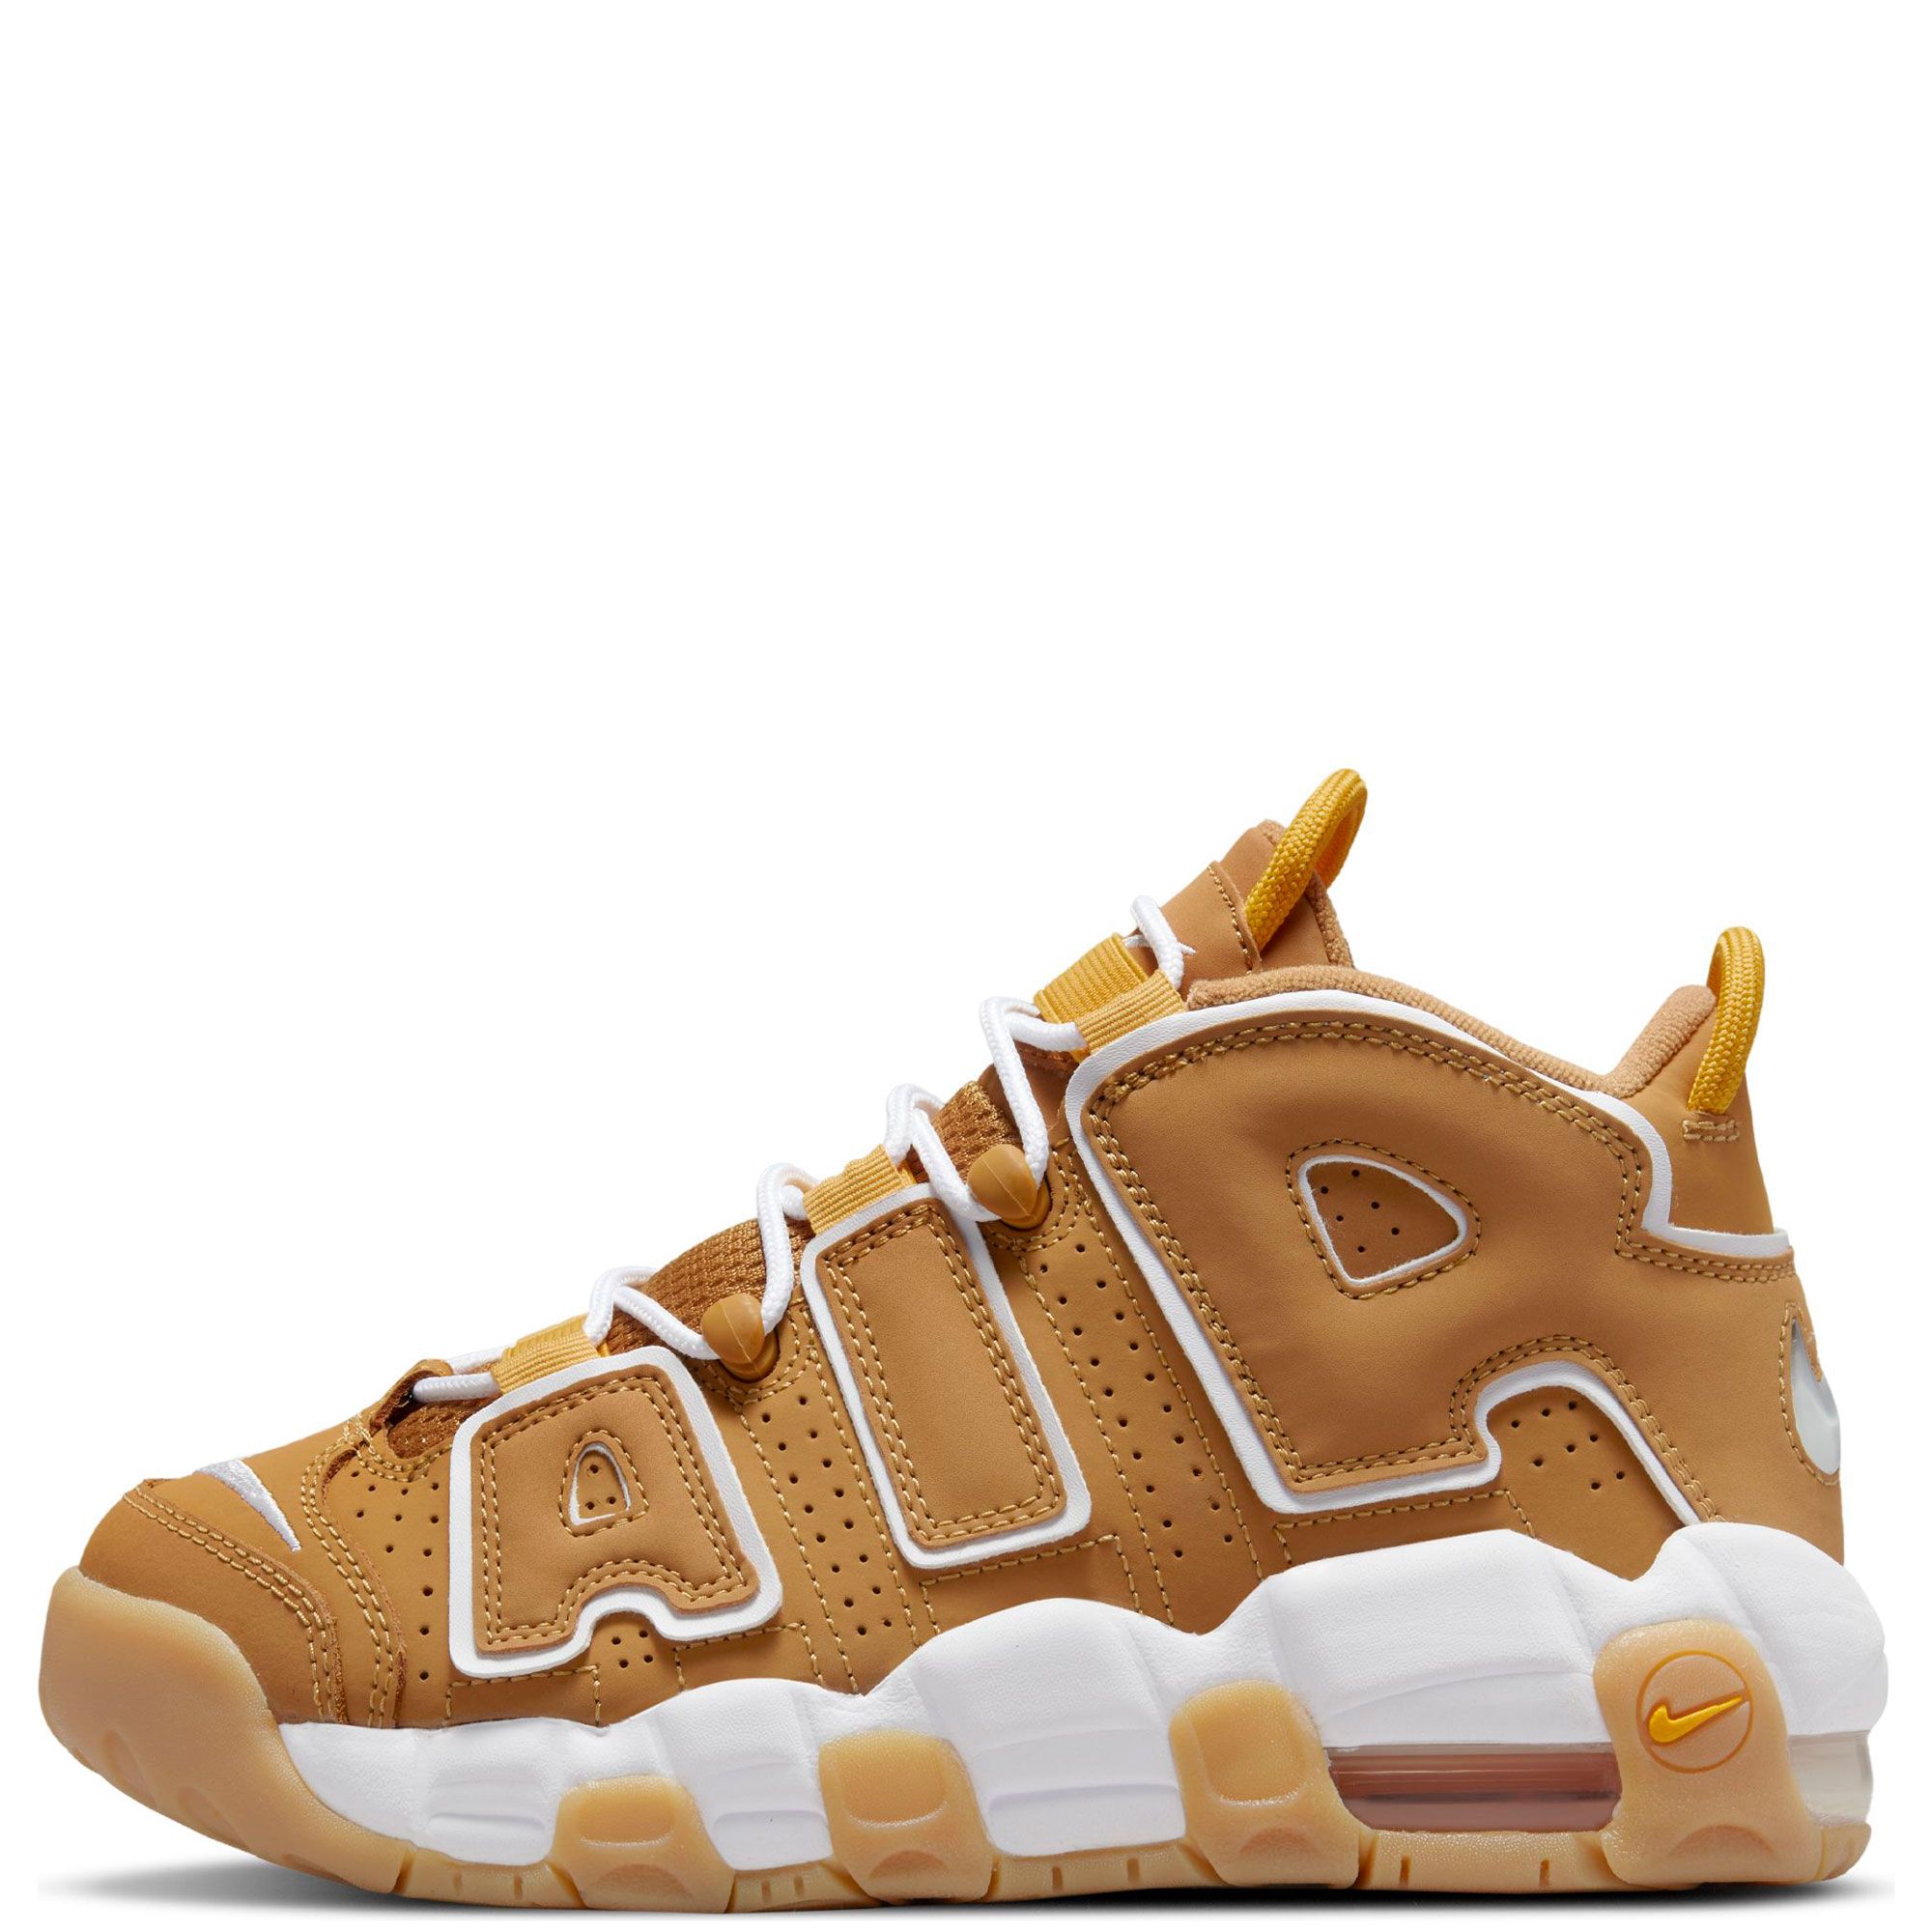 Daily Wear Men Nike Air Uptempo Shoes, Size: 7-10